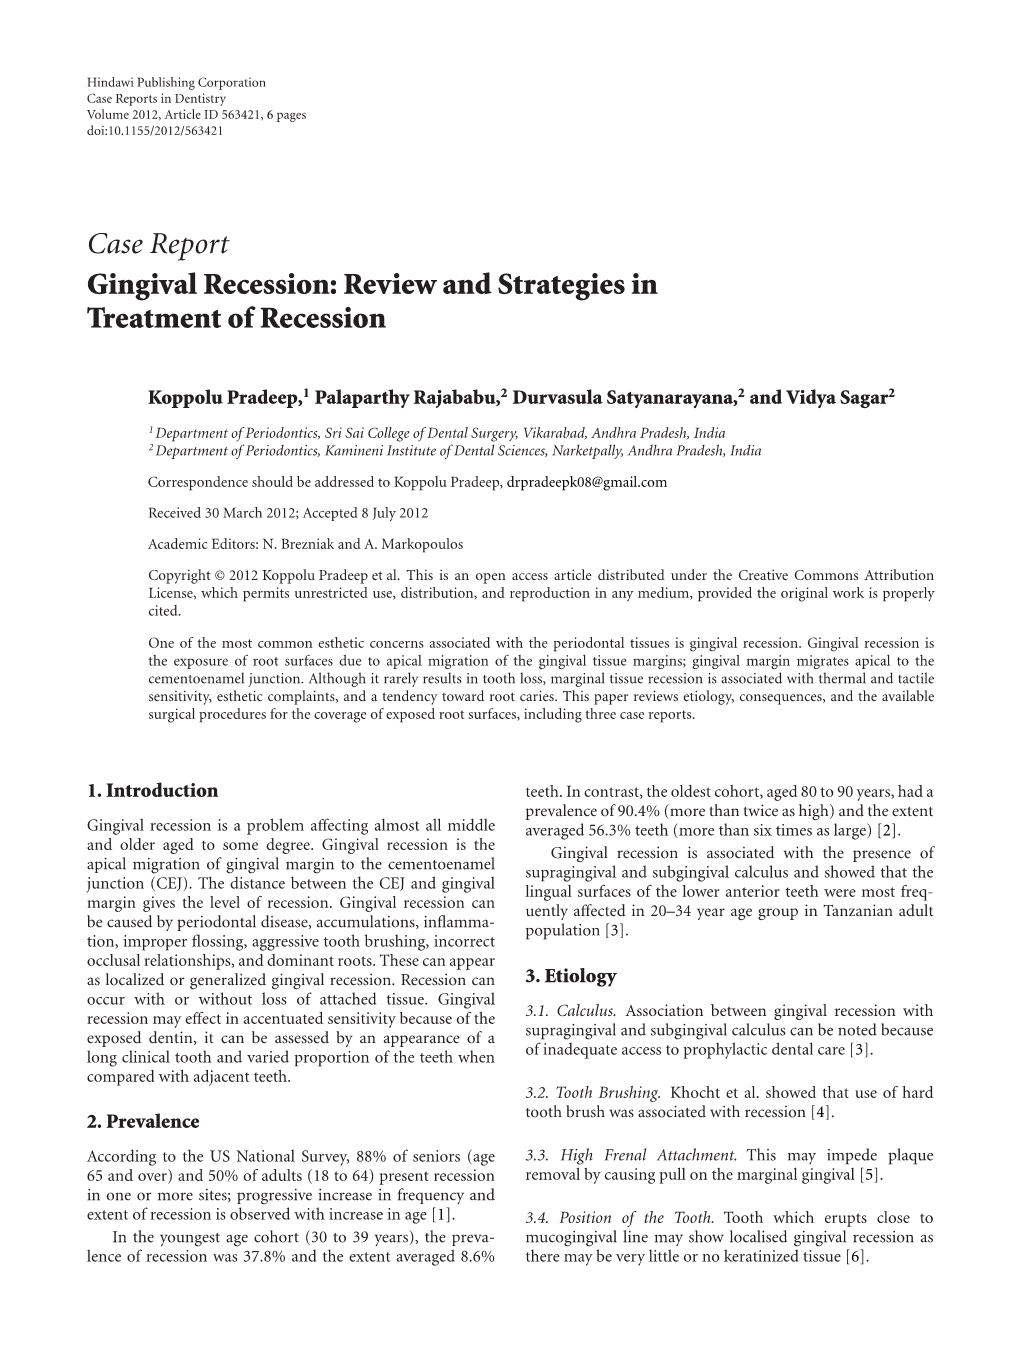 Case Report Gingival Recession: Review and Strategies in Treatment of Recession